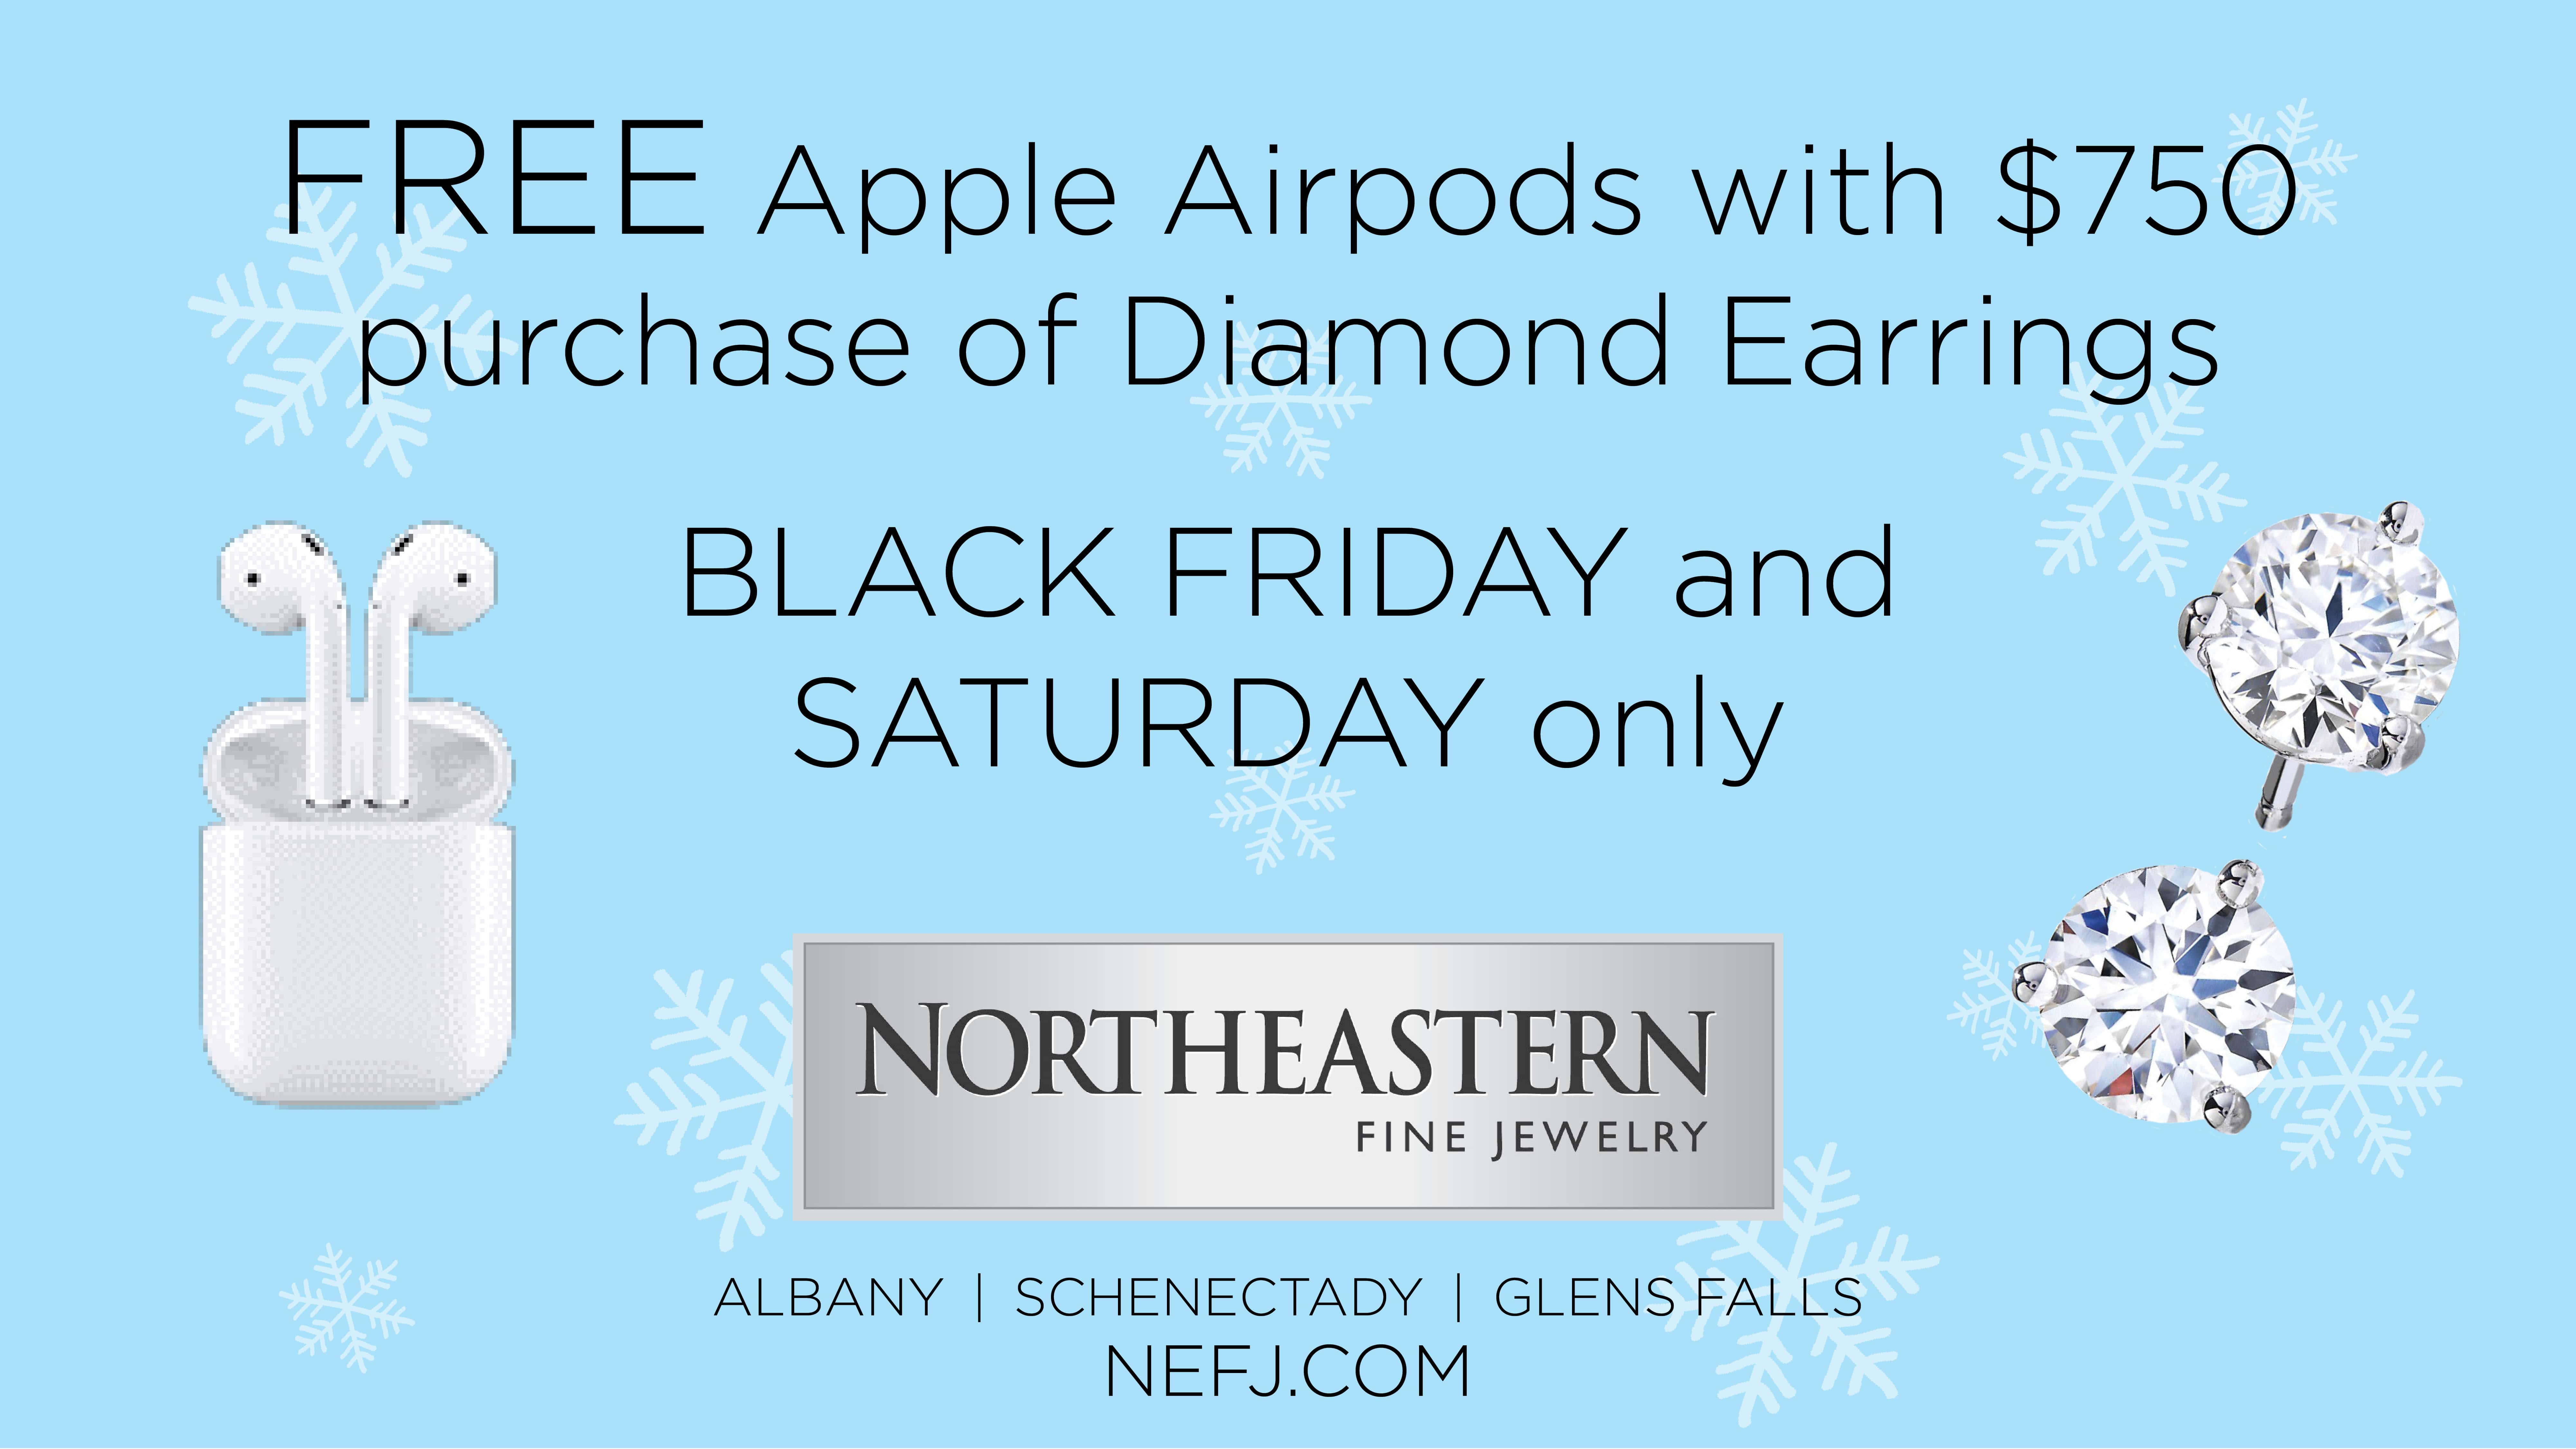 FREE Apple Airpods with $750 Purchase of Diamond Earrings